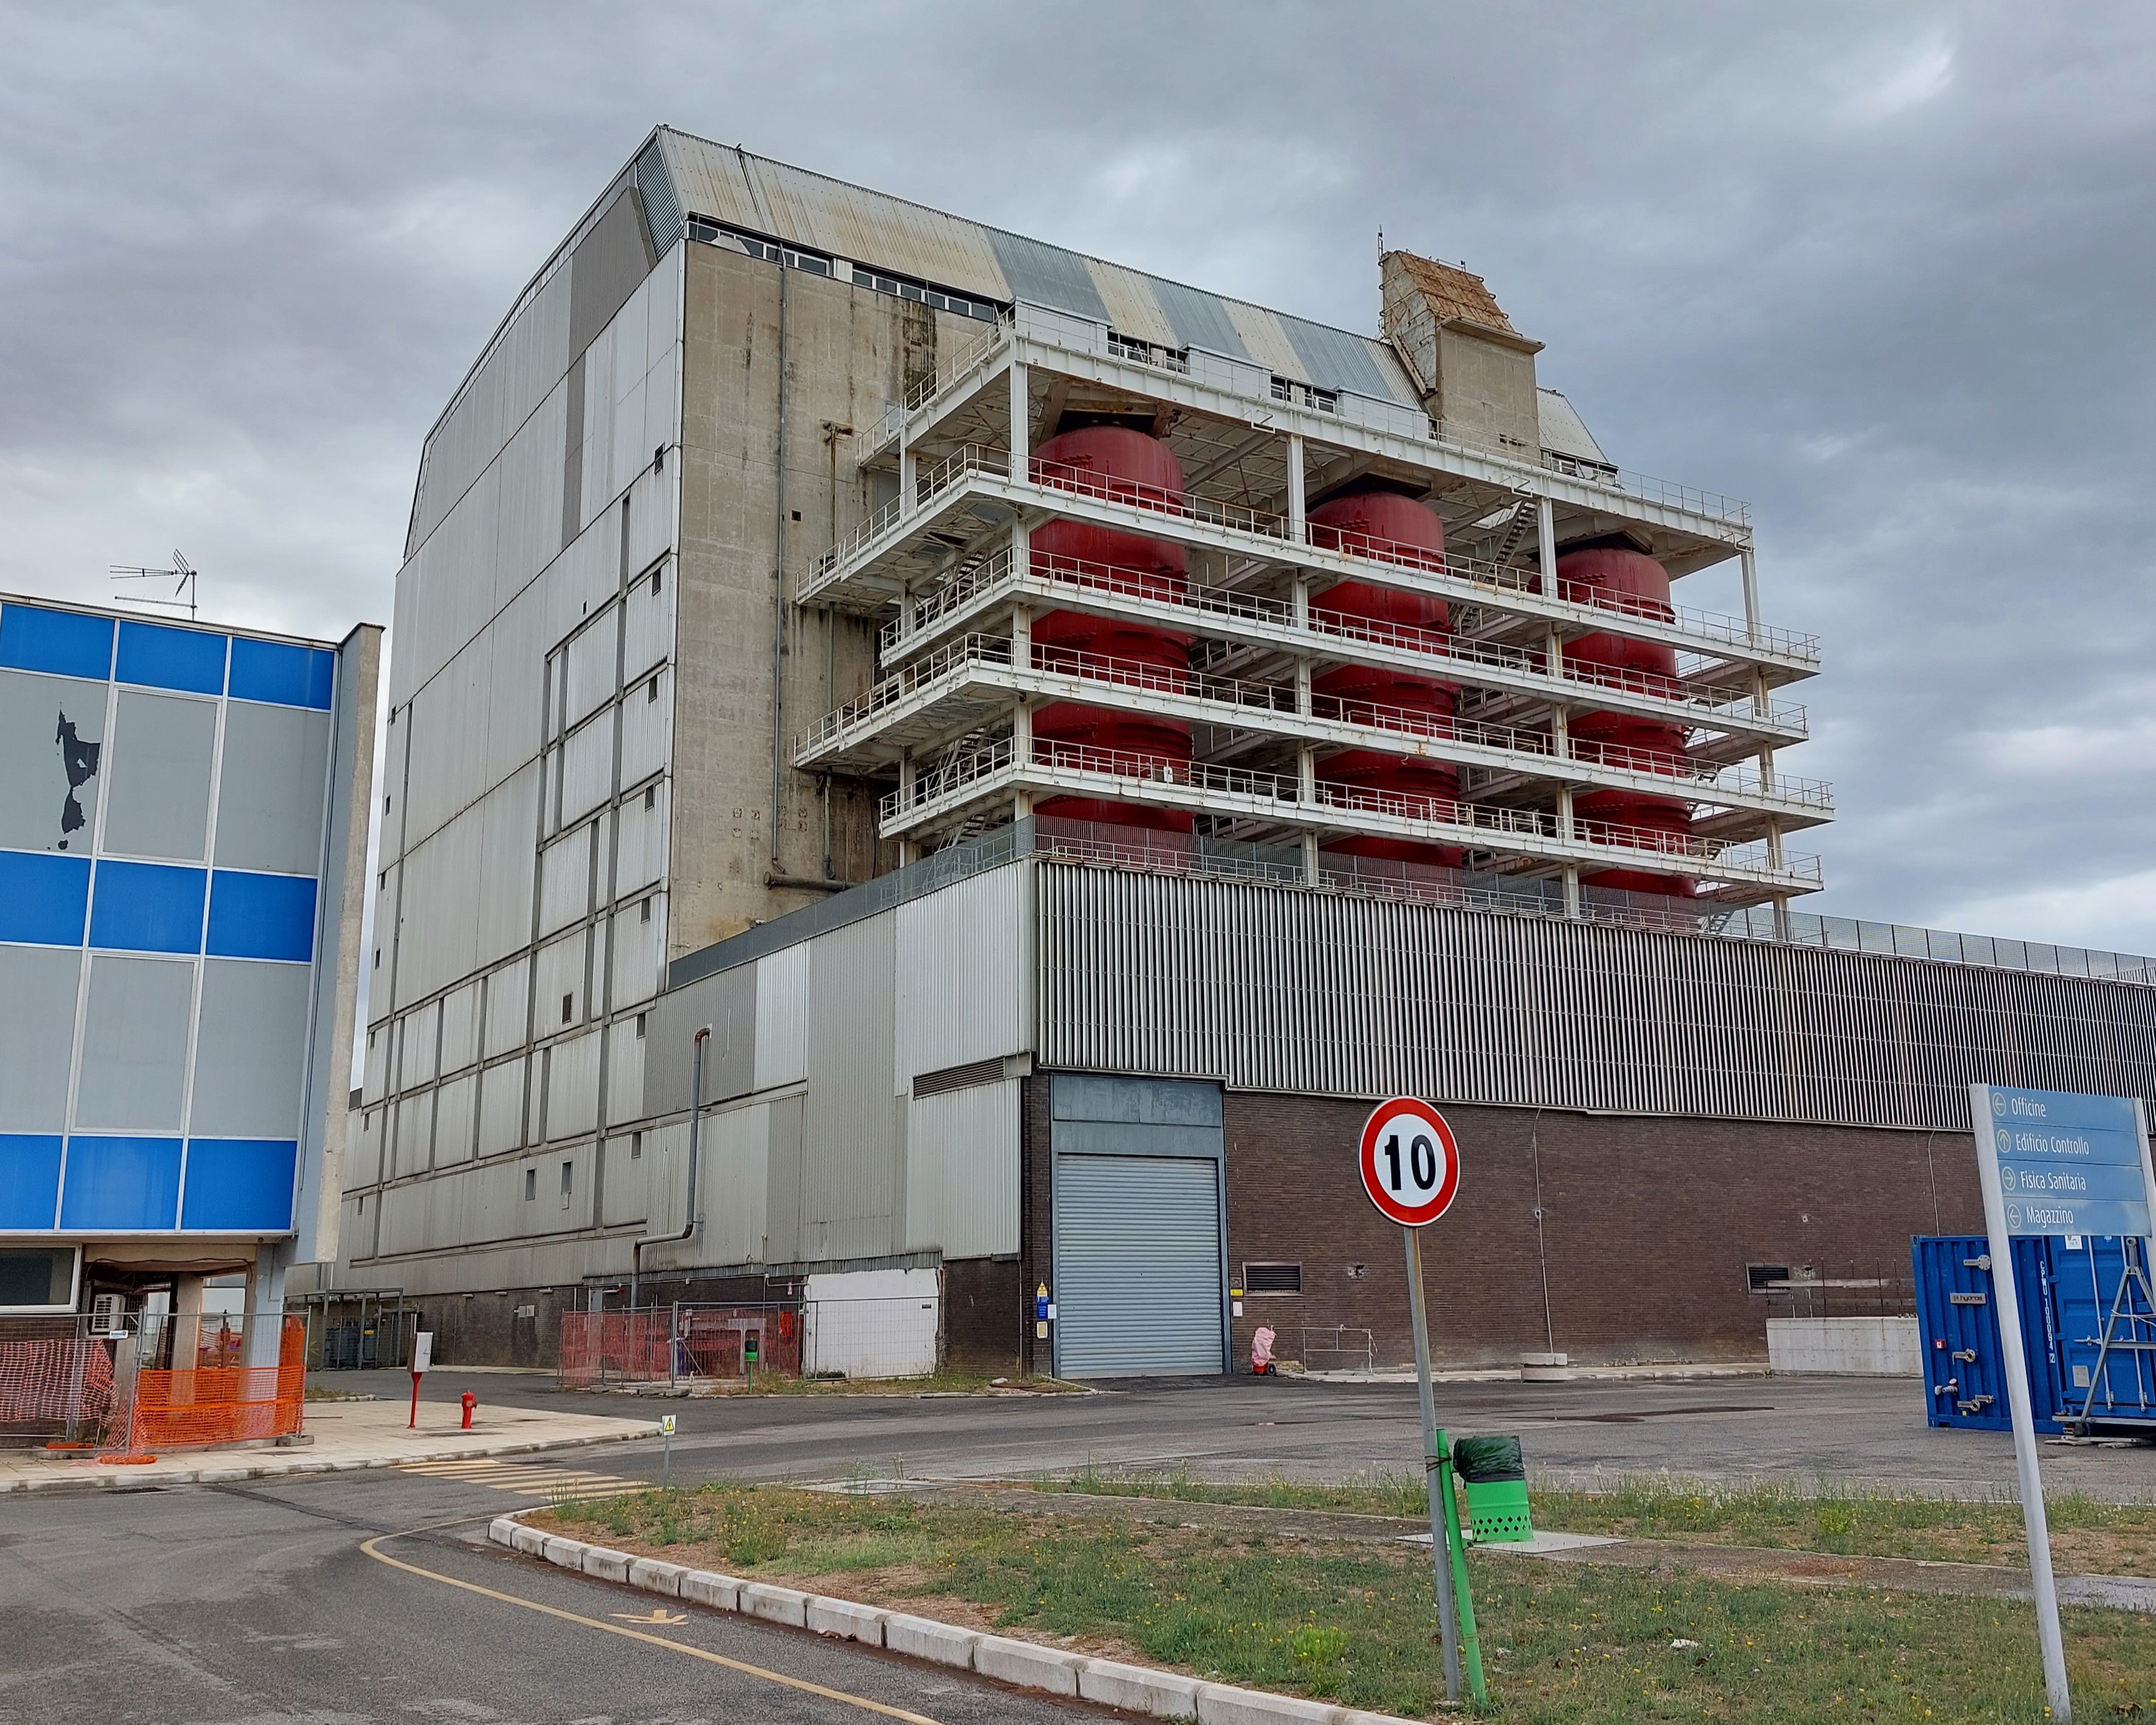 Reactor Building of Decommissioned Latina Nuclear Power Plant, Italy. Davide Orsini. 21 September 2023.